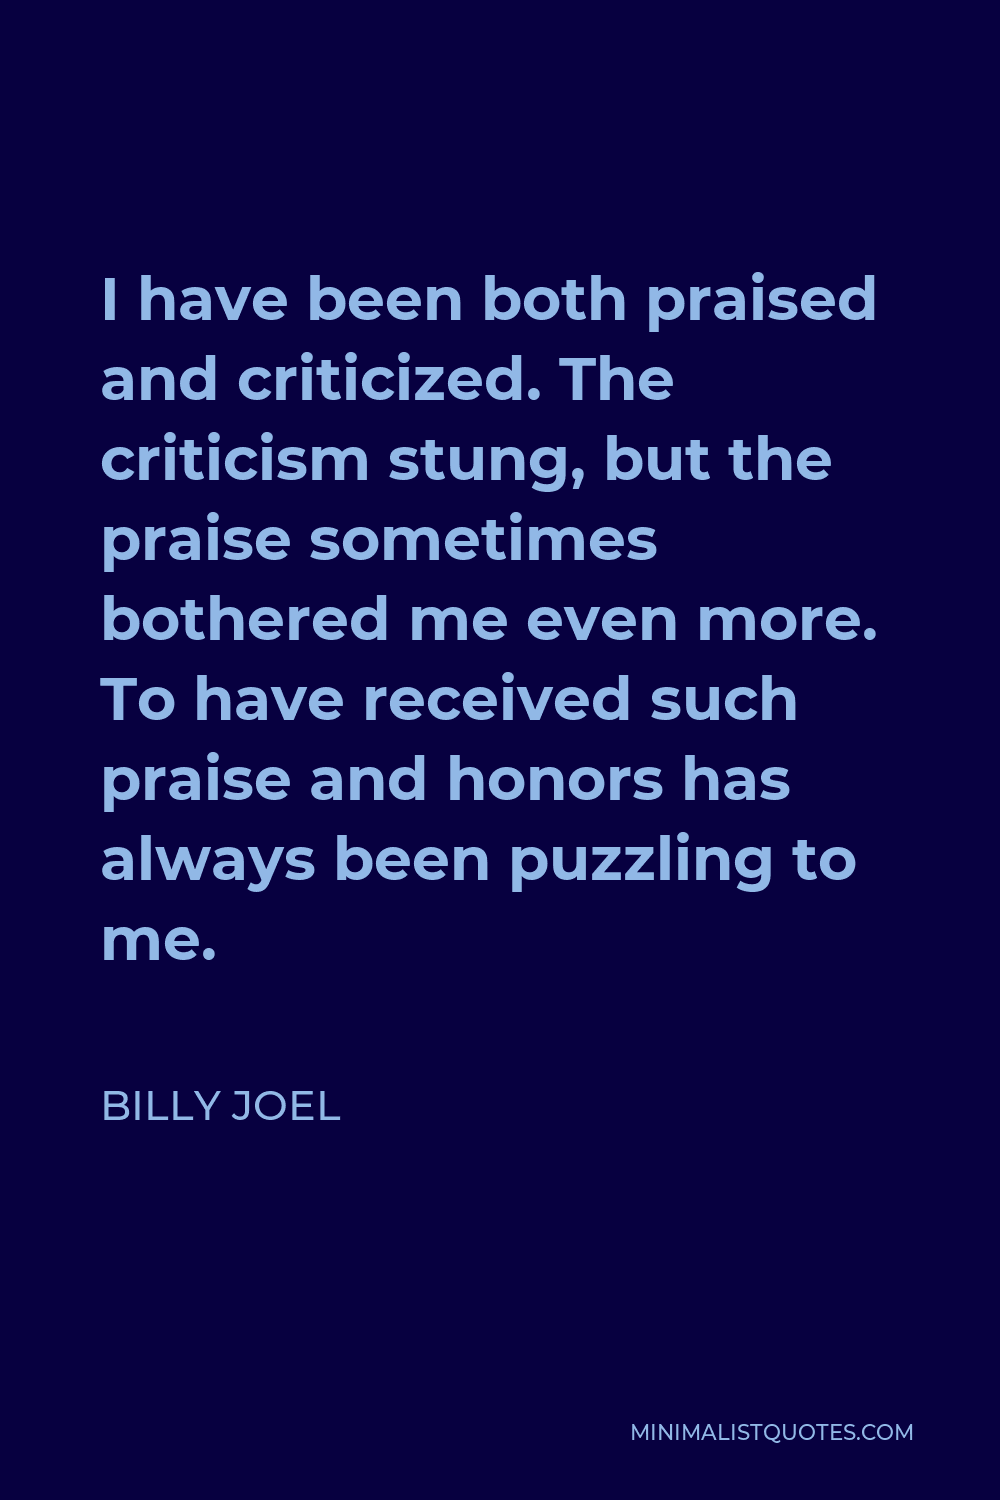 Billy Joel Quote - I have been both praised and criticized. The criticism stung, but the praise sometimes bothered me even more. To have received such praise and honors has always been puzzling to me.